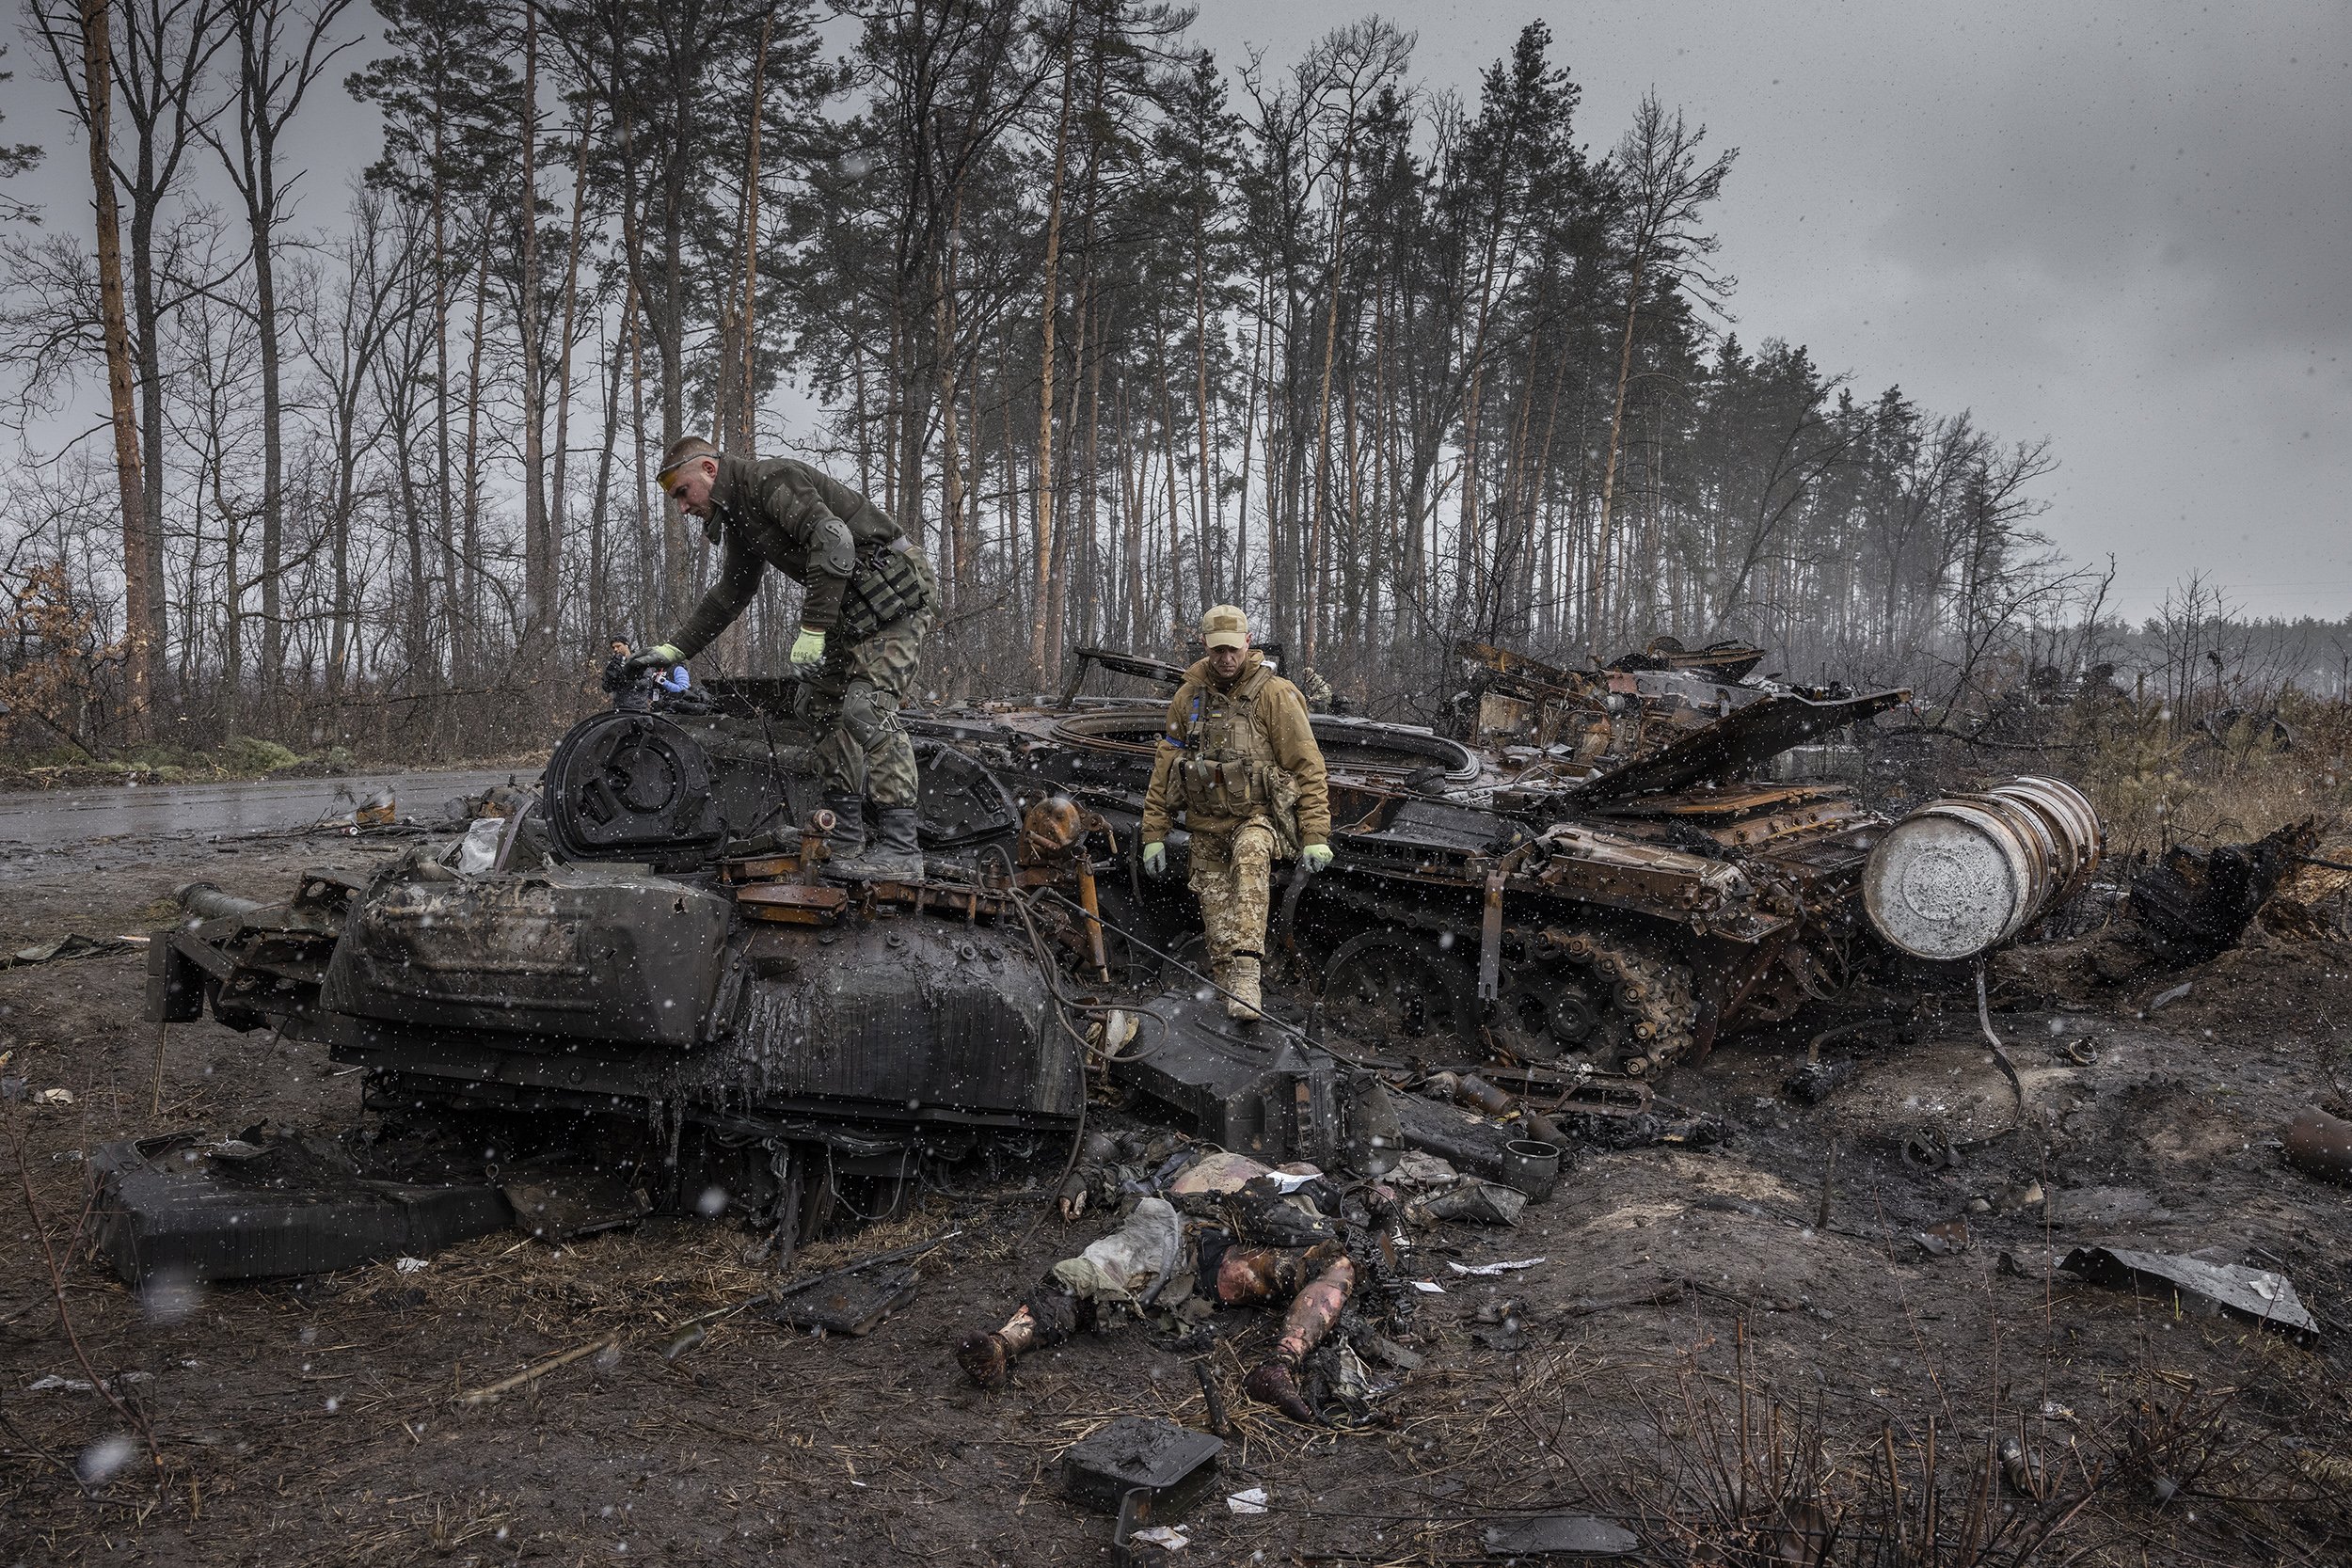  The burnt corpse of a 22-year-old Russian soldier was retrieved from the destroyed remnants of a tank on the western outskirts of Kyiv. Russian forces were driven from the area just 2 days before, as they abandoned their attempt to take the capital 